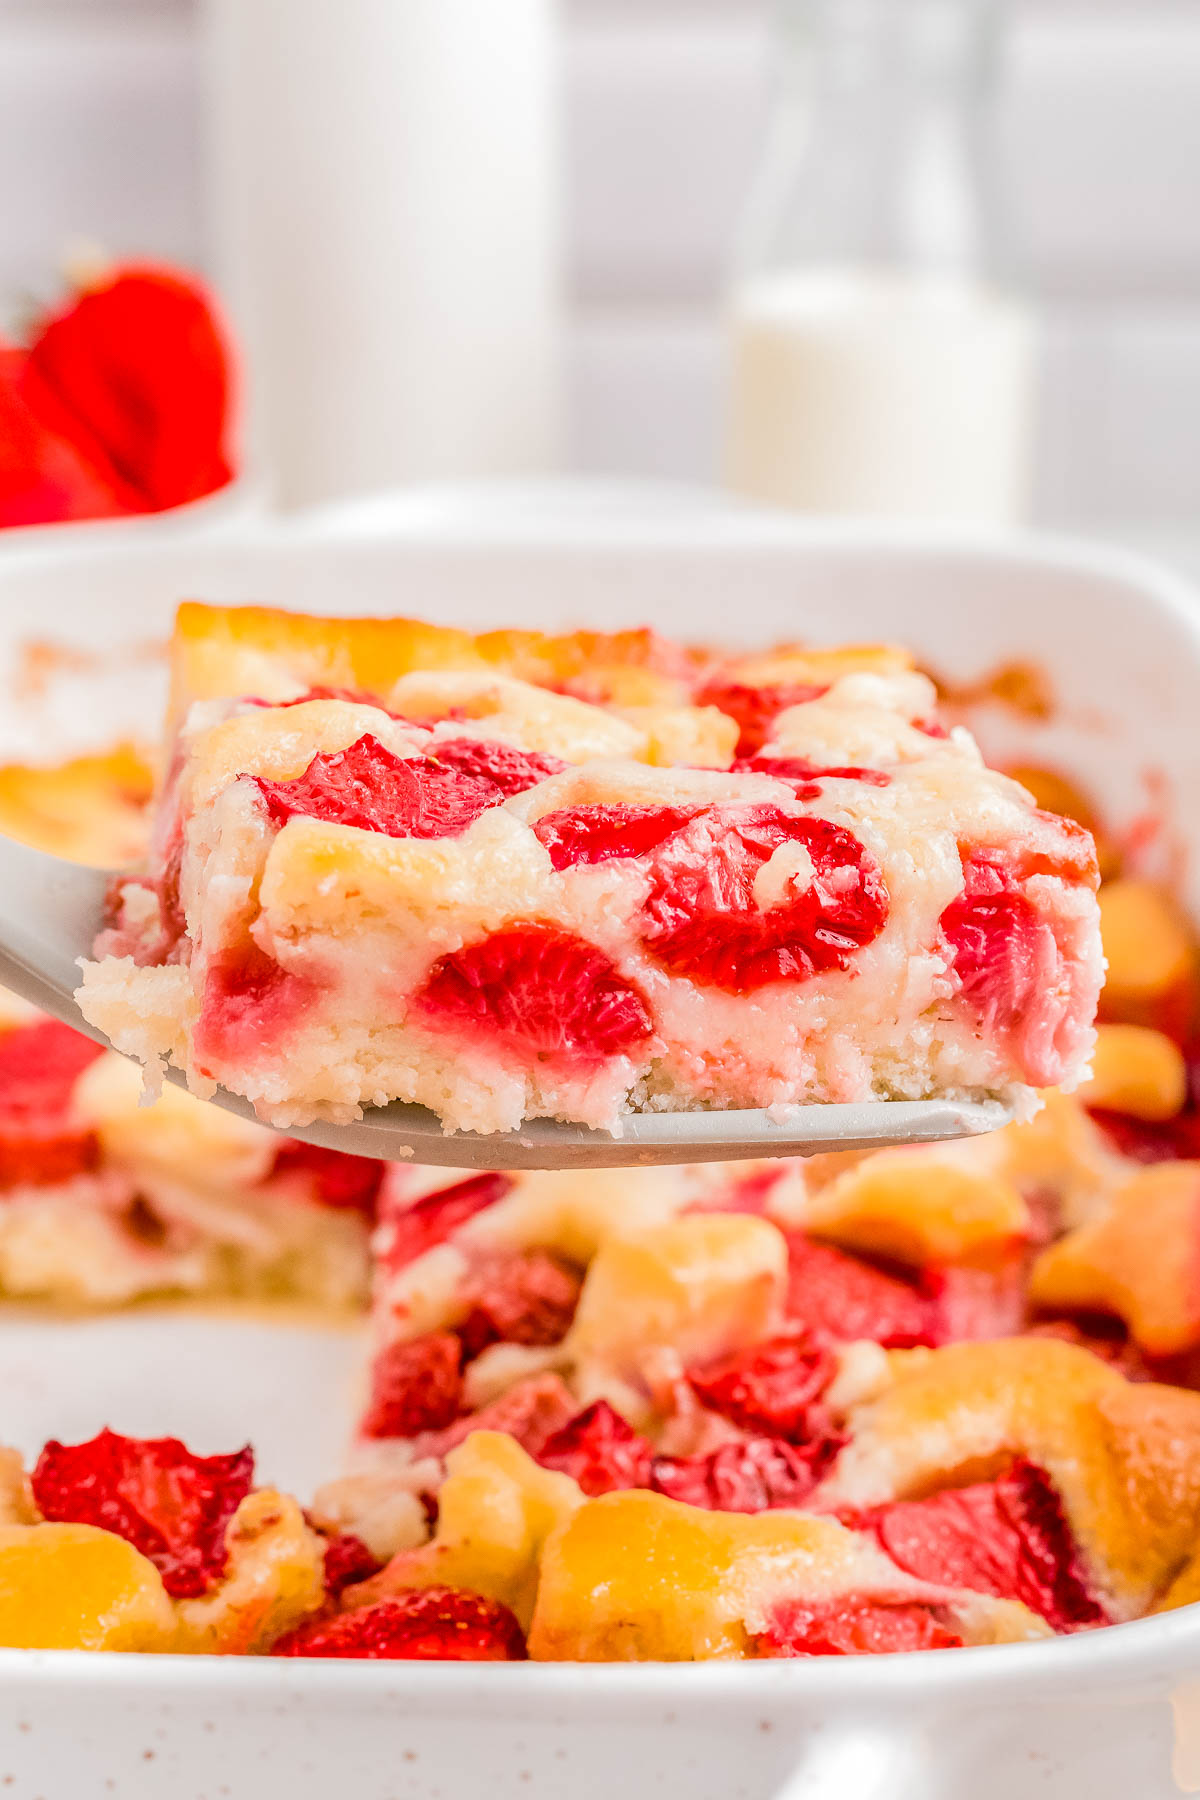 A slice of strawberry cobbler being lifted from a dish, showcasing ripe strawberries and a fluffy texture, with a glass of milk in the background.